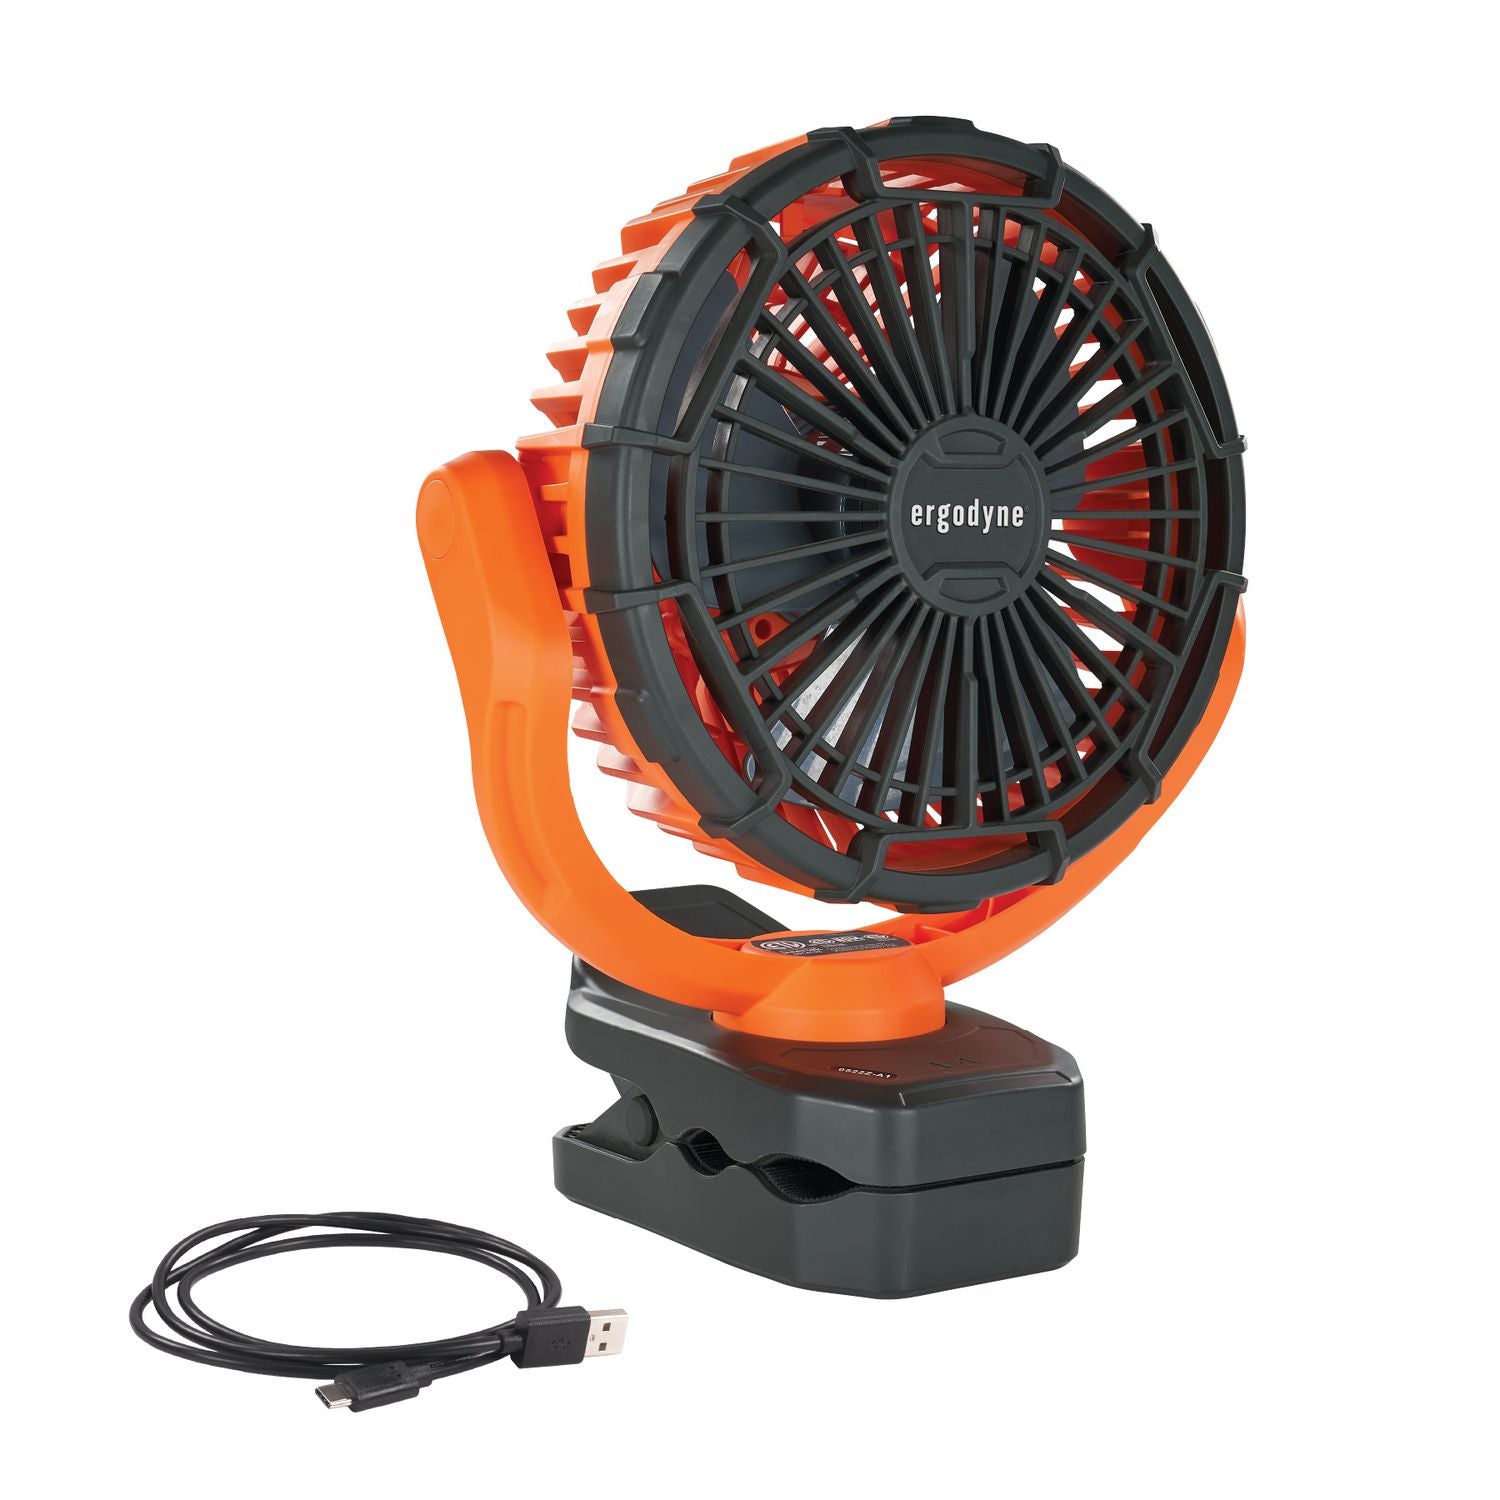 chill-its-6090-rechargeable-portable-jobsite-fan-95-orange-black-ships-in-1-3-business-days_ego12800 - 1